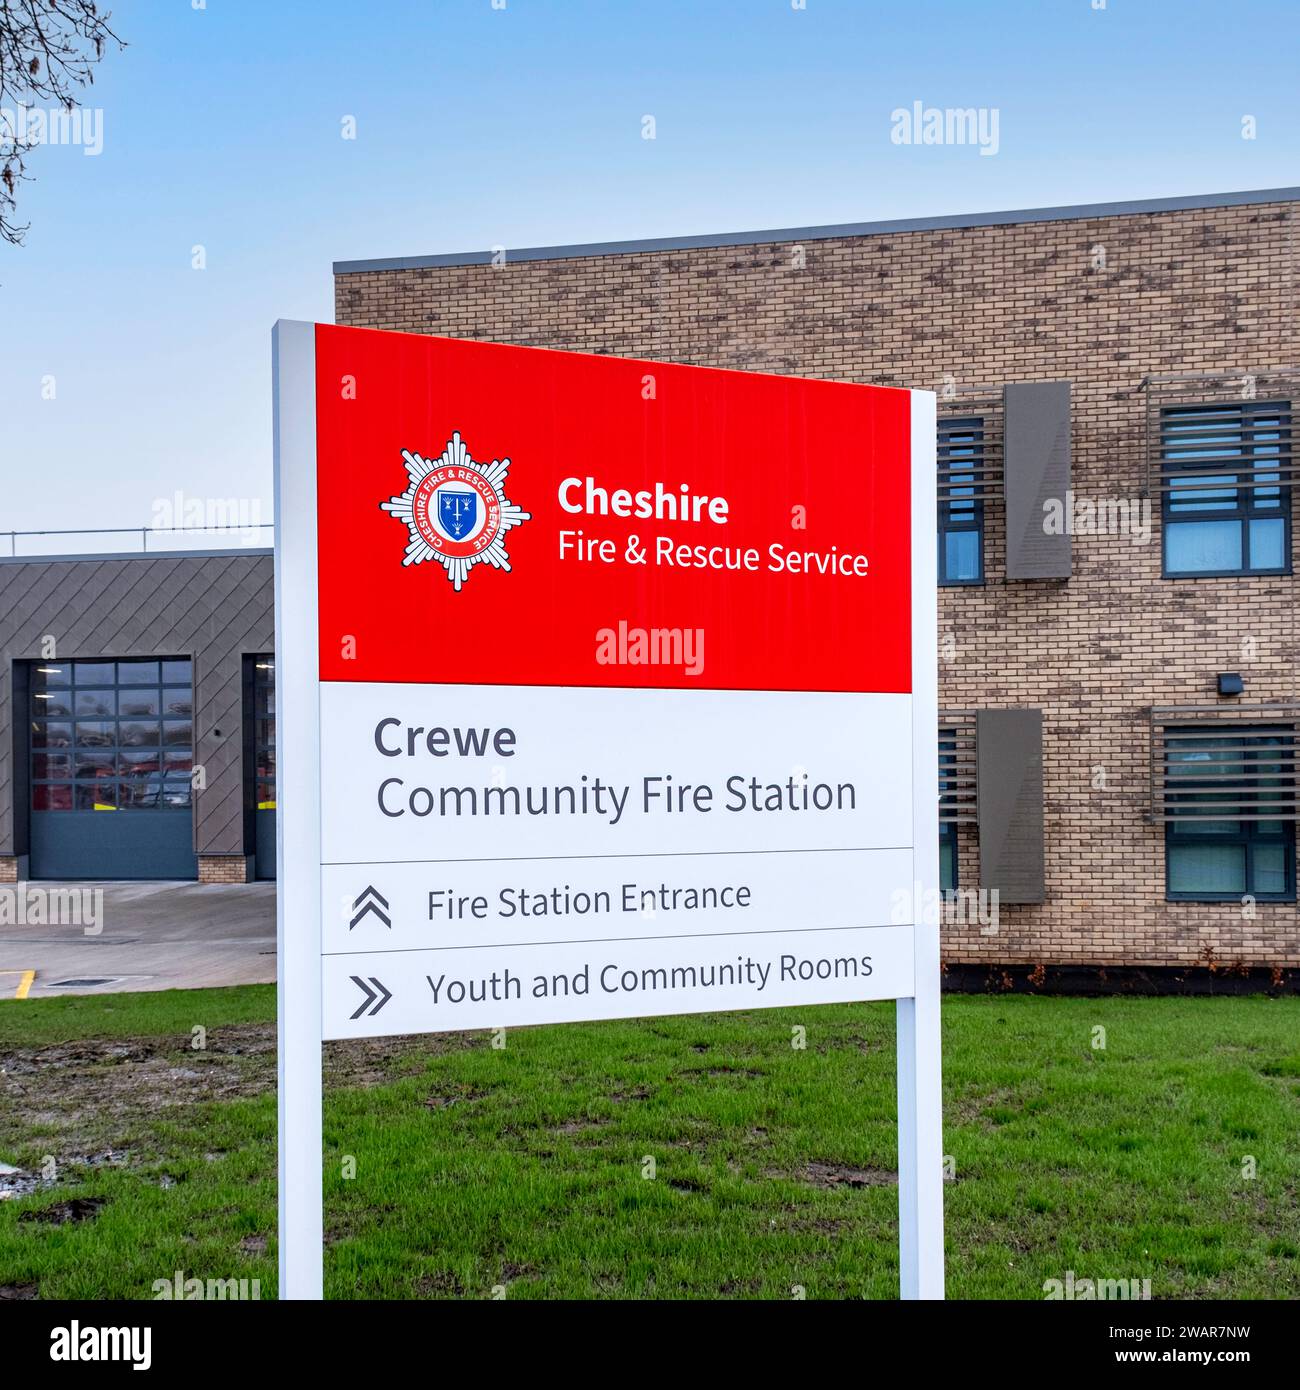 Cheshire Fire & Rescue service, Community Fire Station in Crewe Cheshire UK Stock Photo